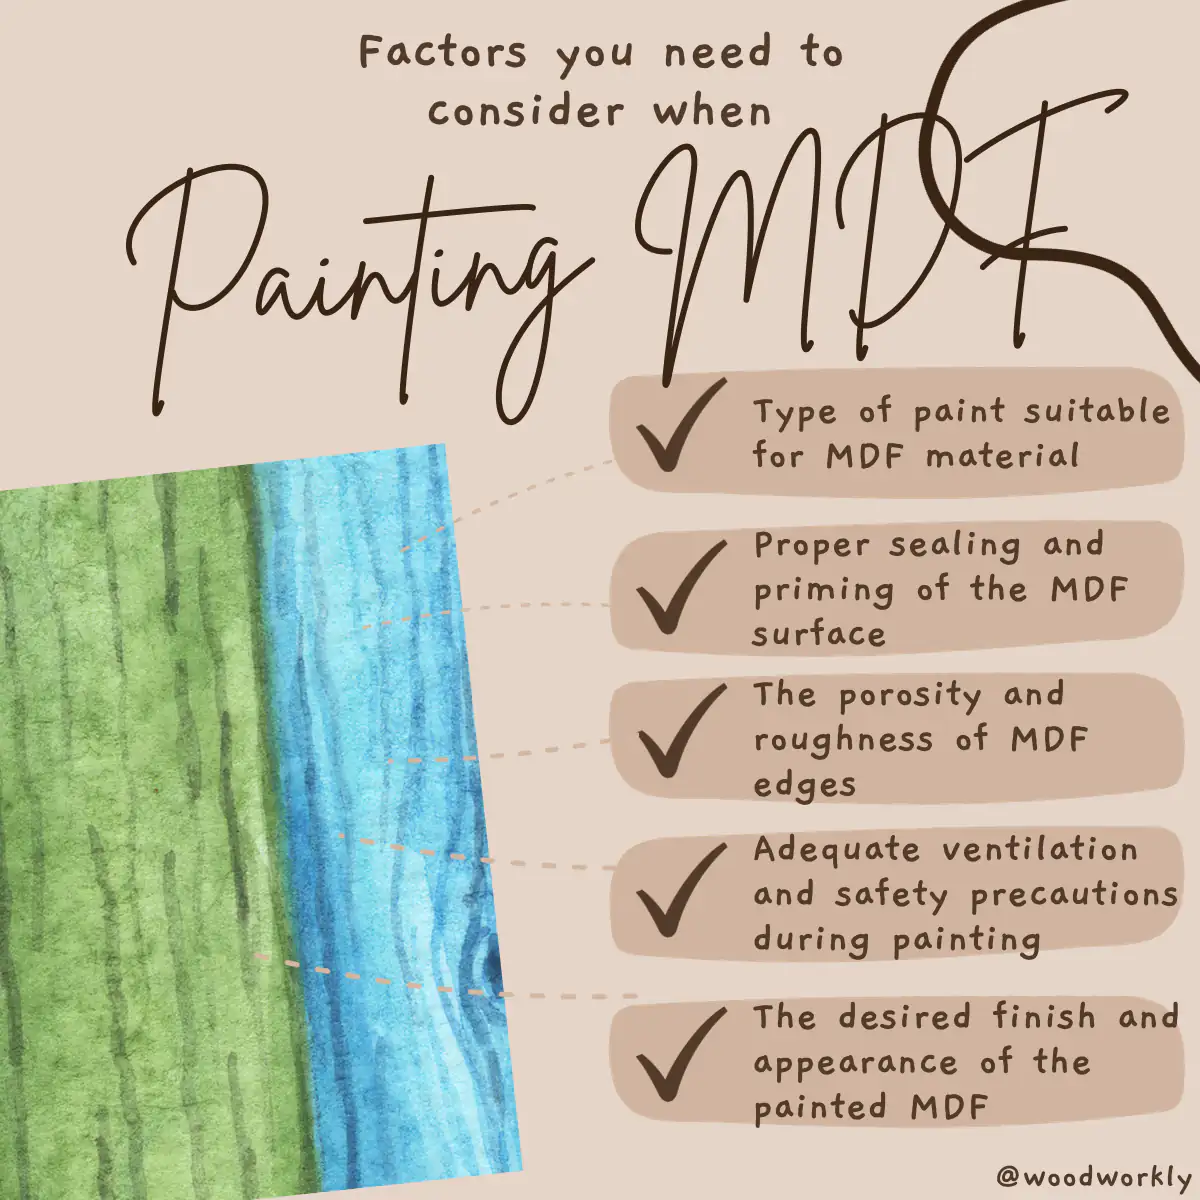 Factors you need to consider when painting MDF